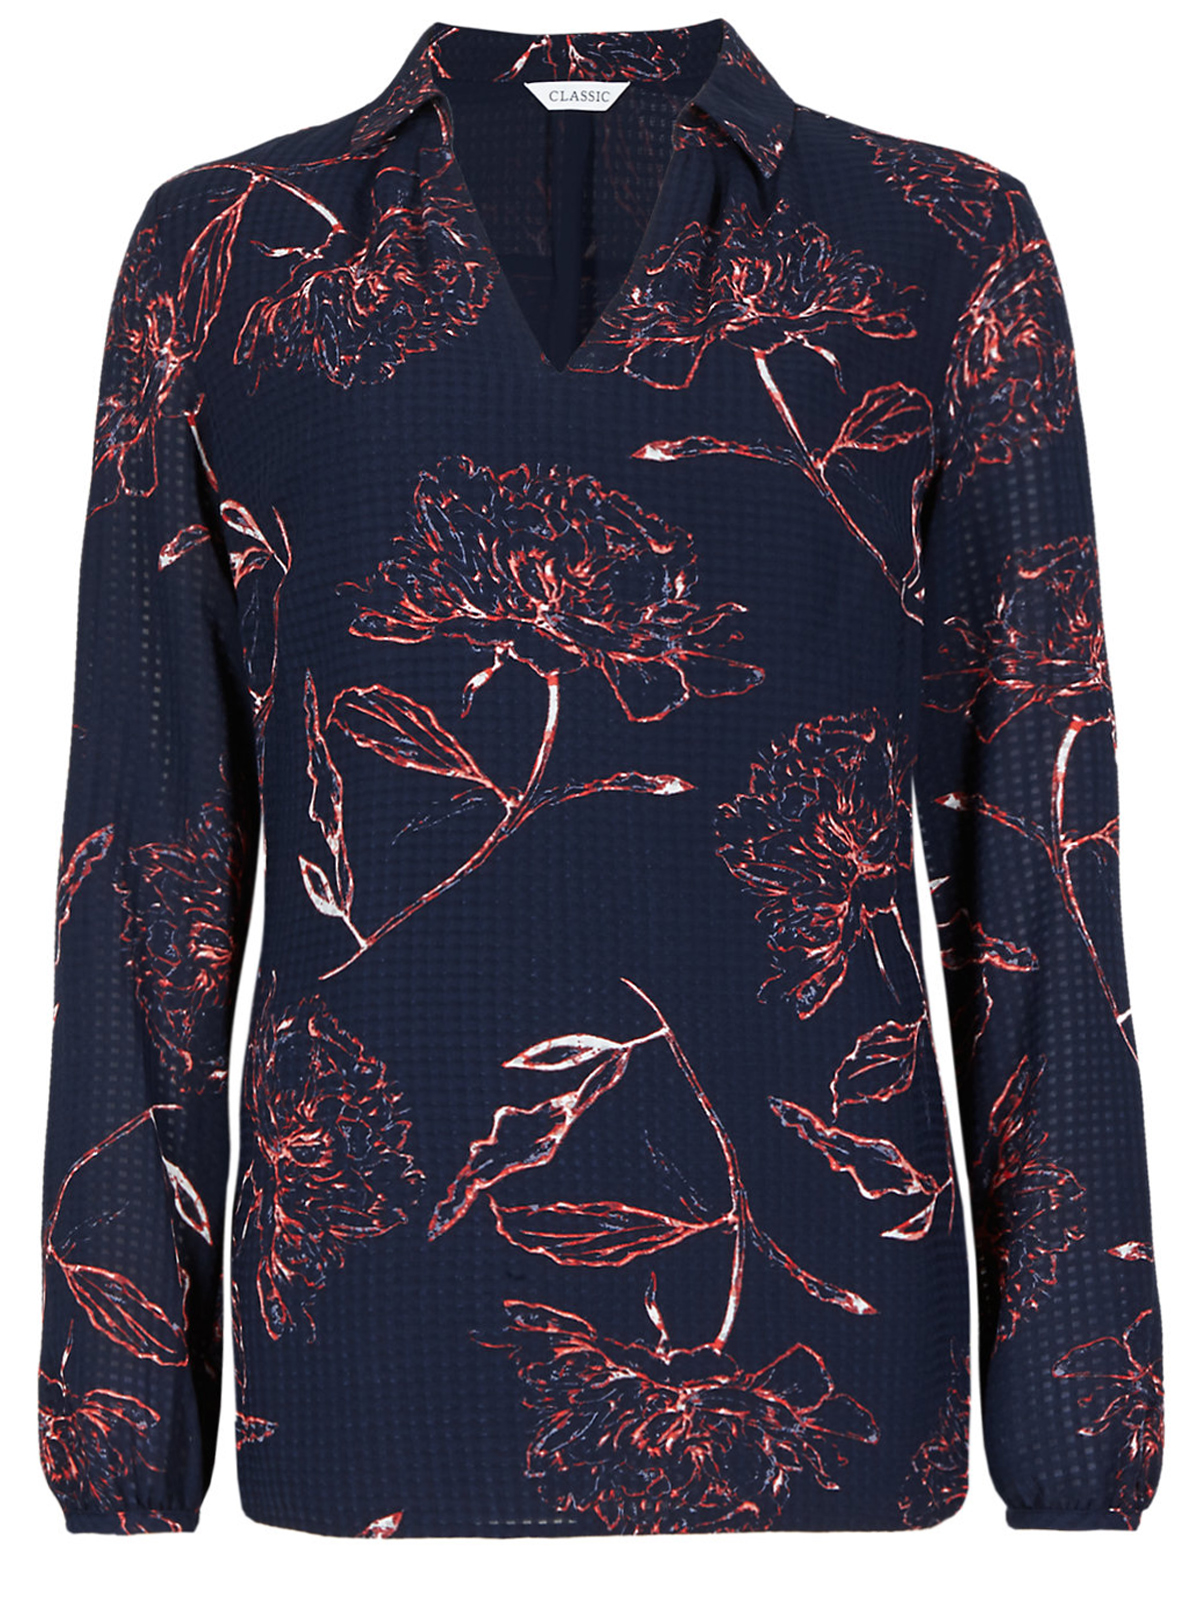 Marks and Spencer - - M&5 NAVY Sketch Floral Long Sleeve Blouse - Size ...